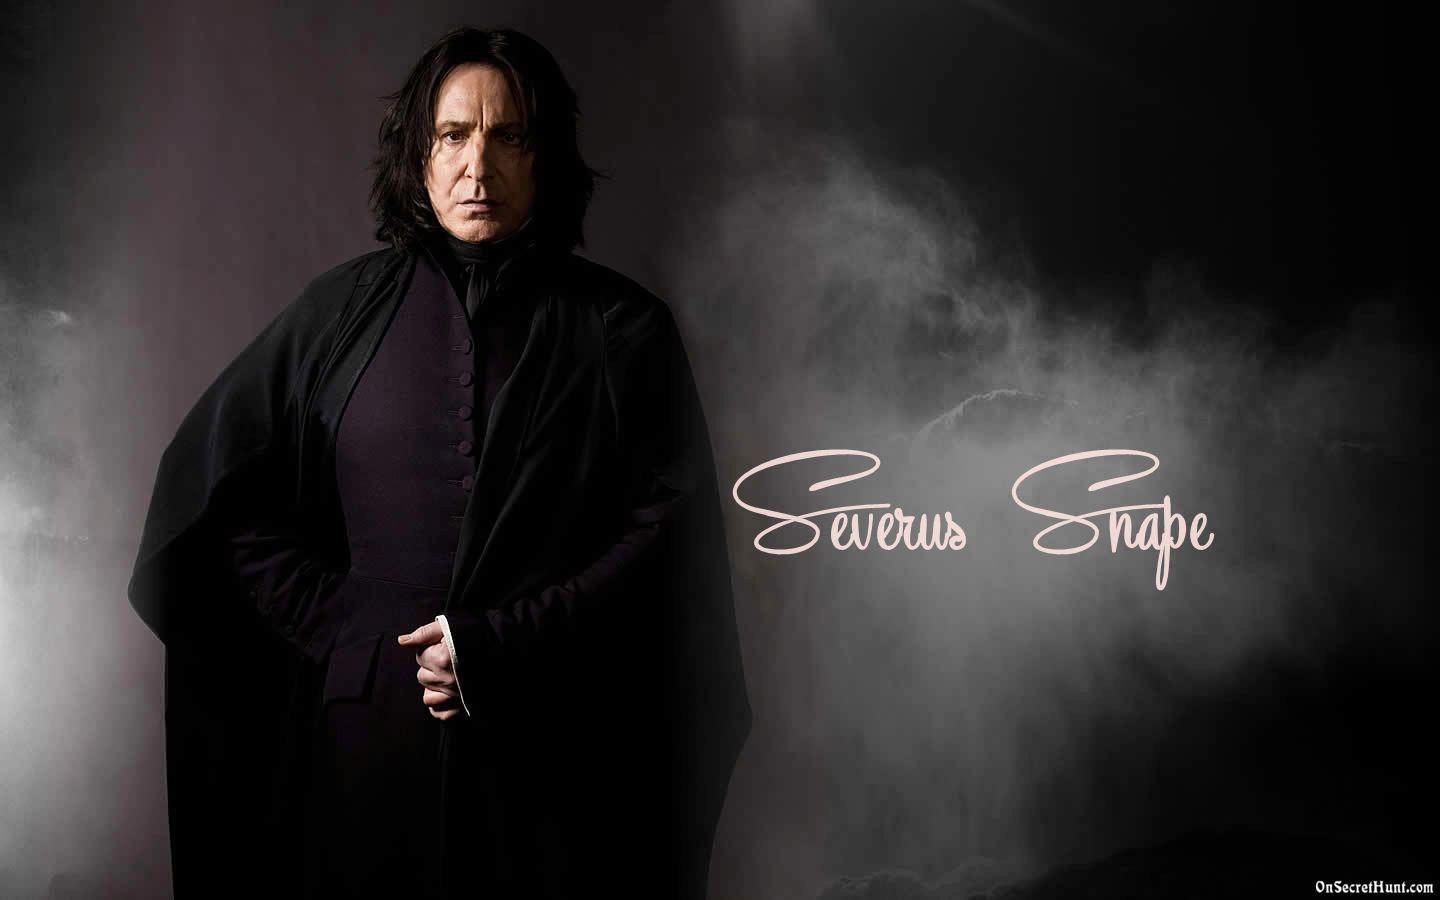 Quotes by Professor Snape that Changed Completely after he Died